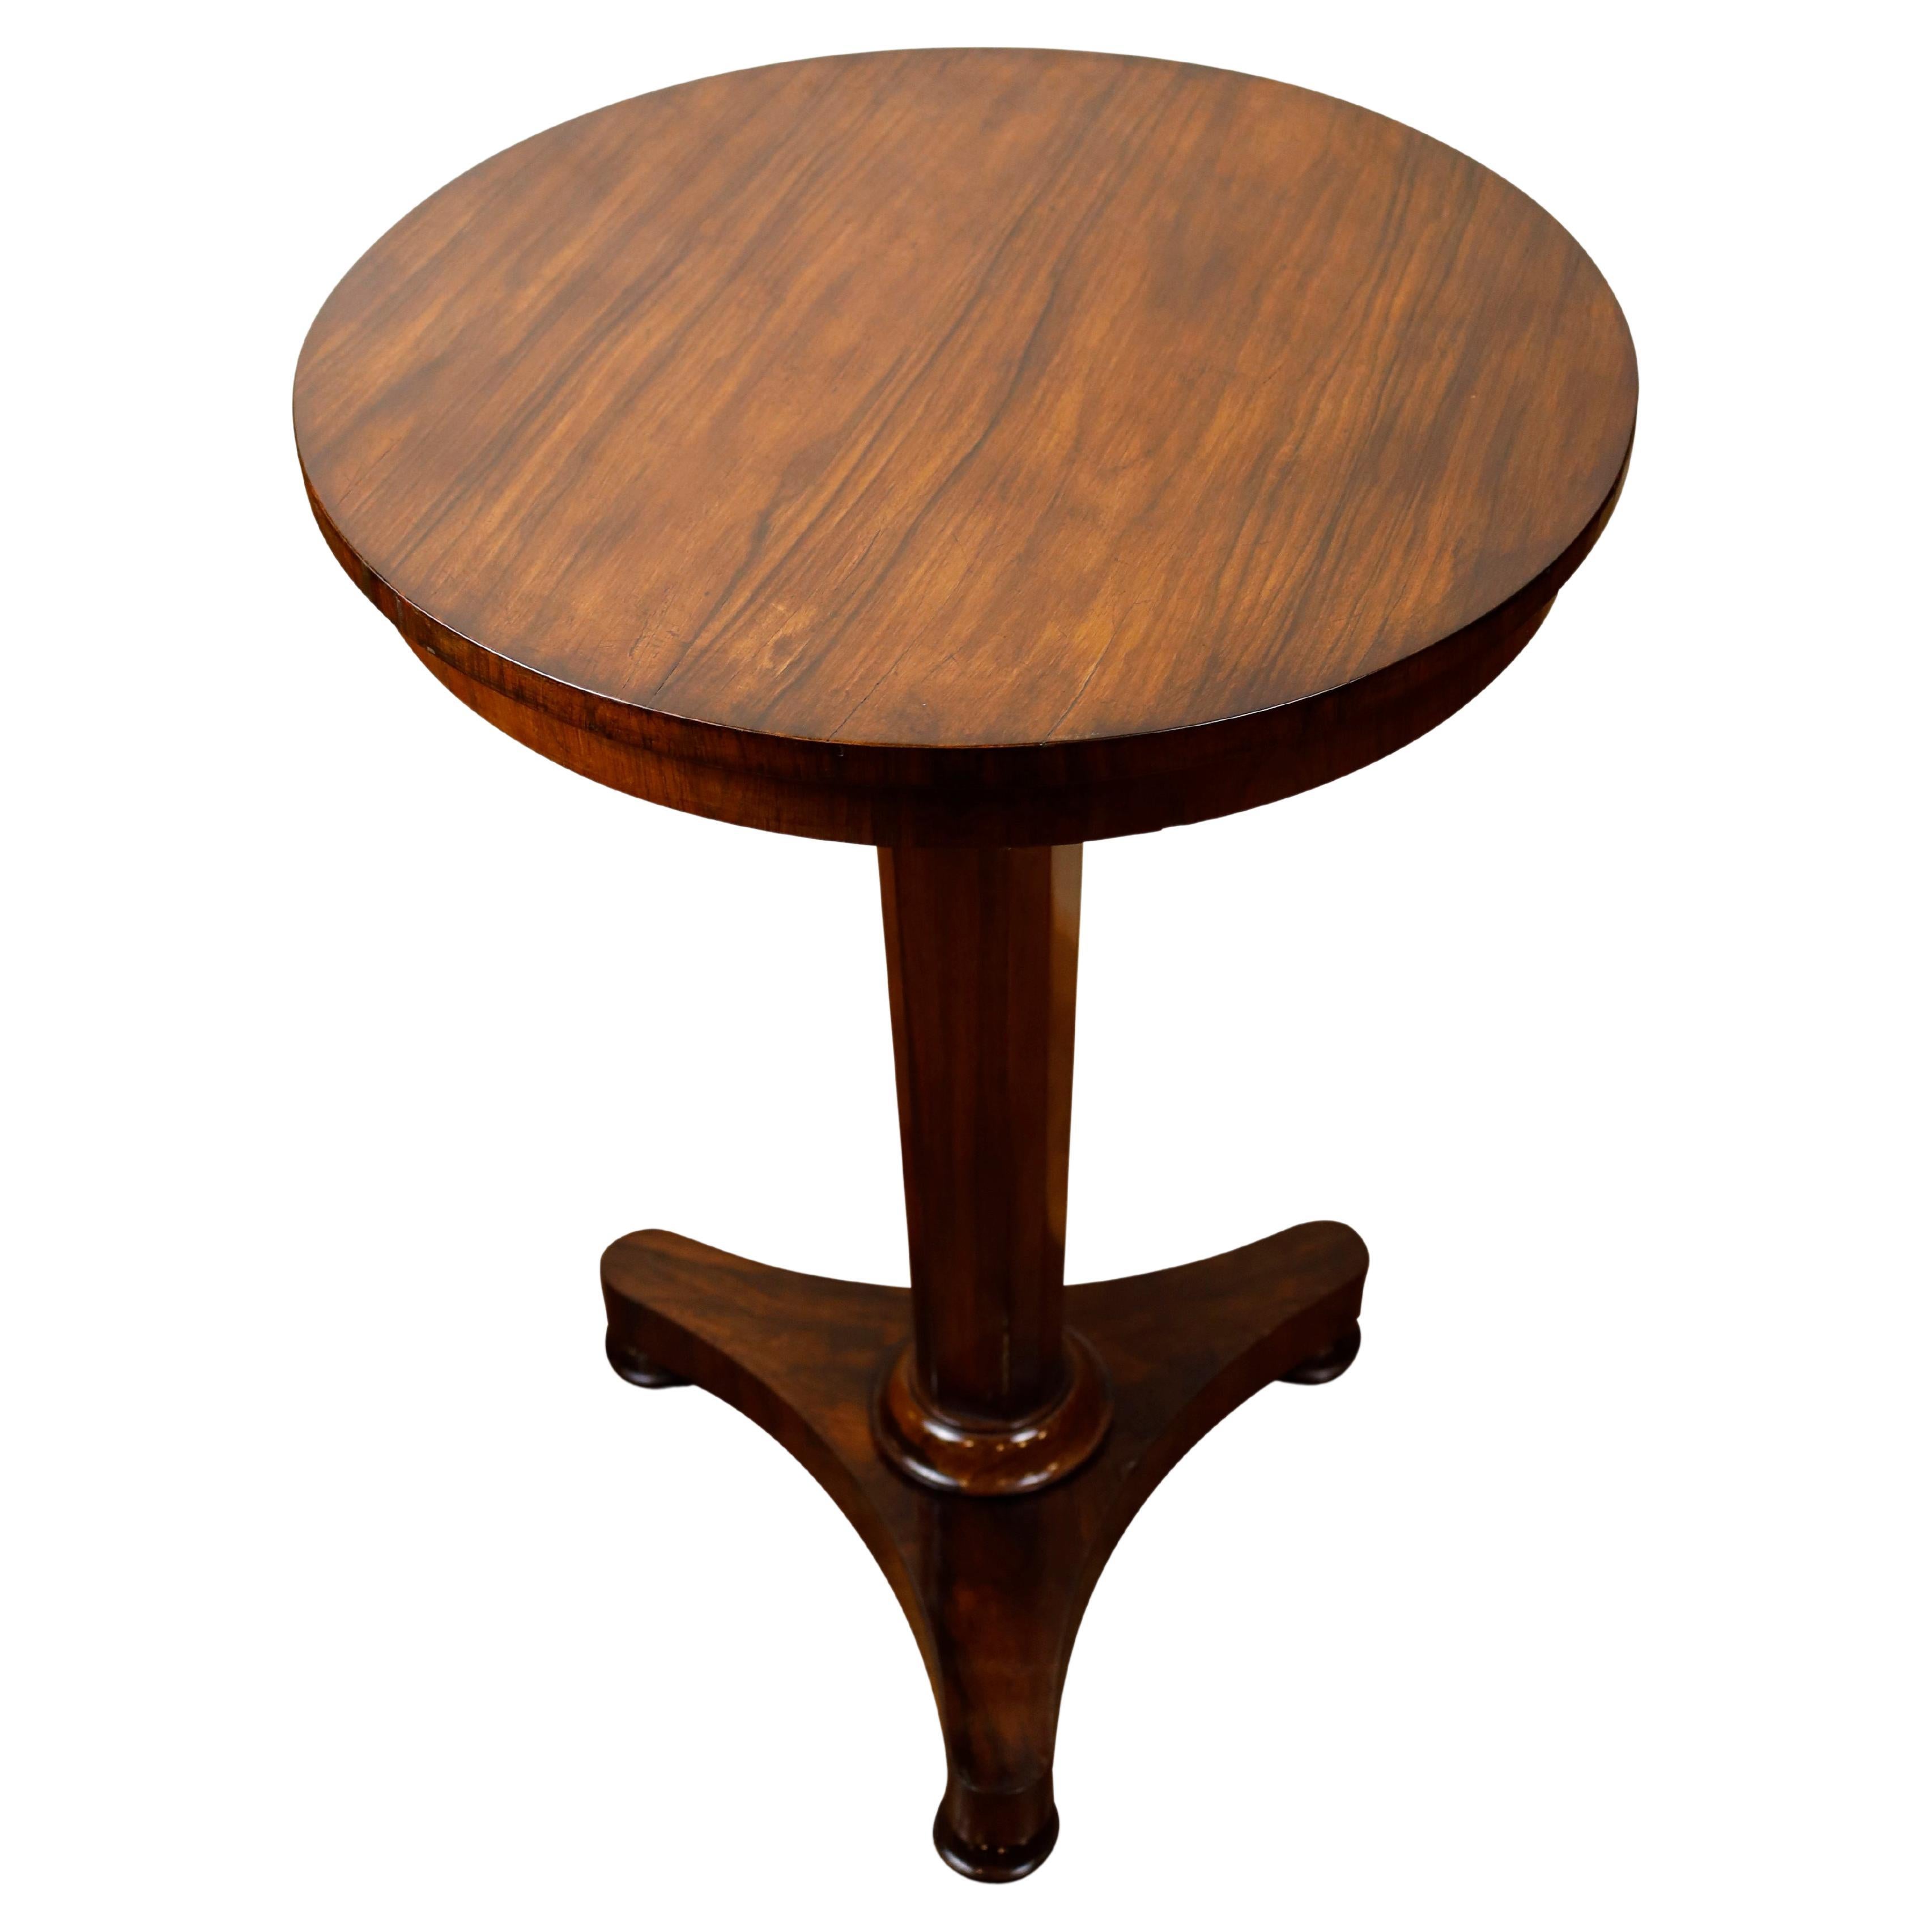 William IV Rosewood Side Table